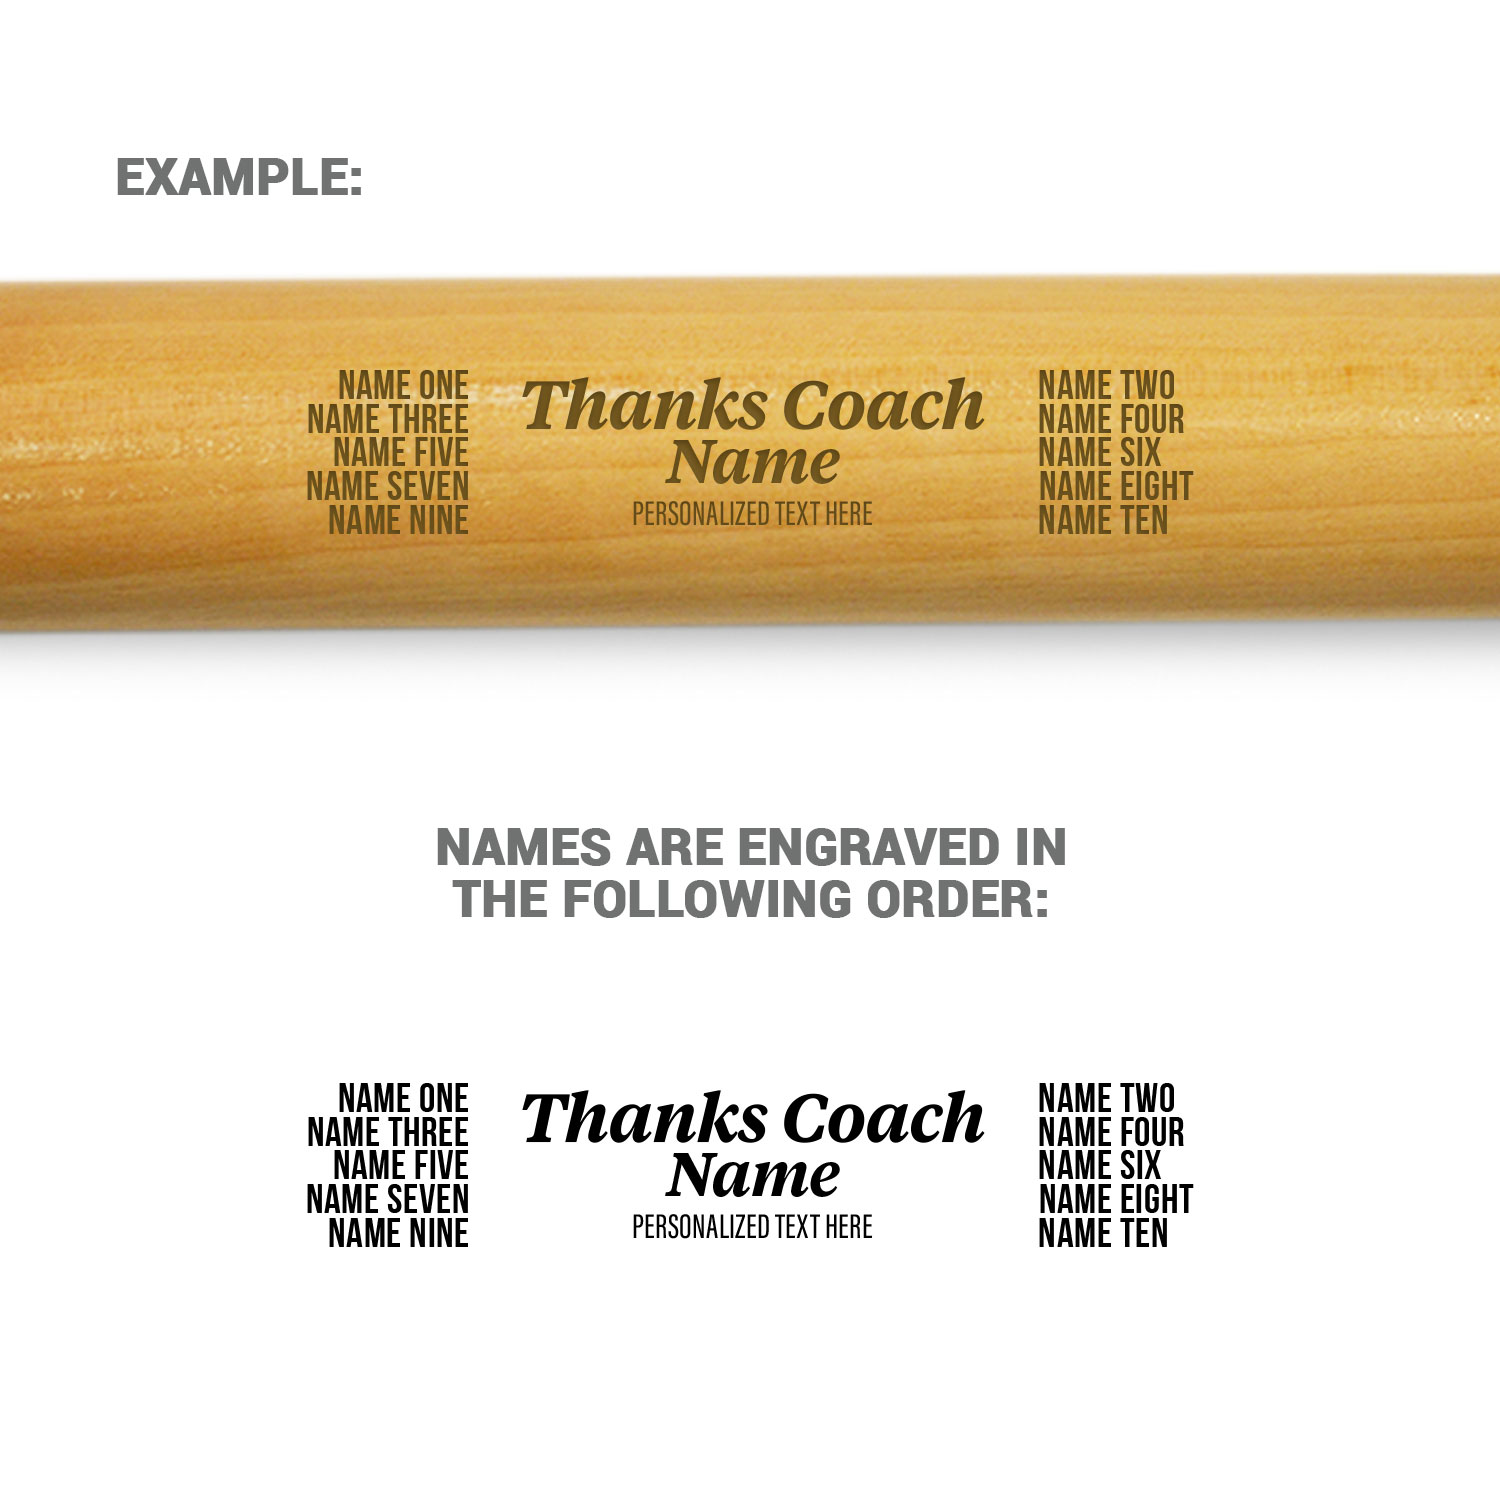 Engraved Mini Softball Bat - Thanks Coach With Roster - Personalization Image